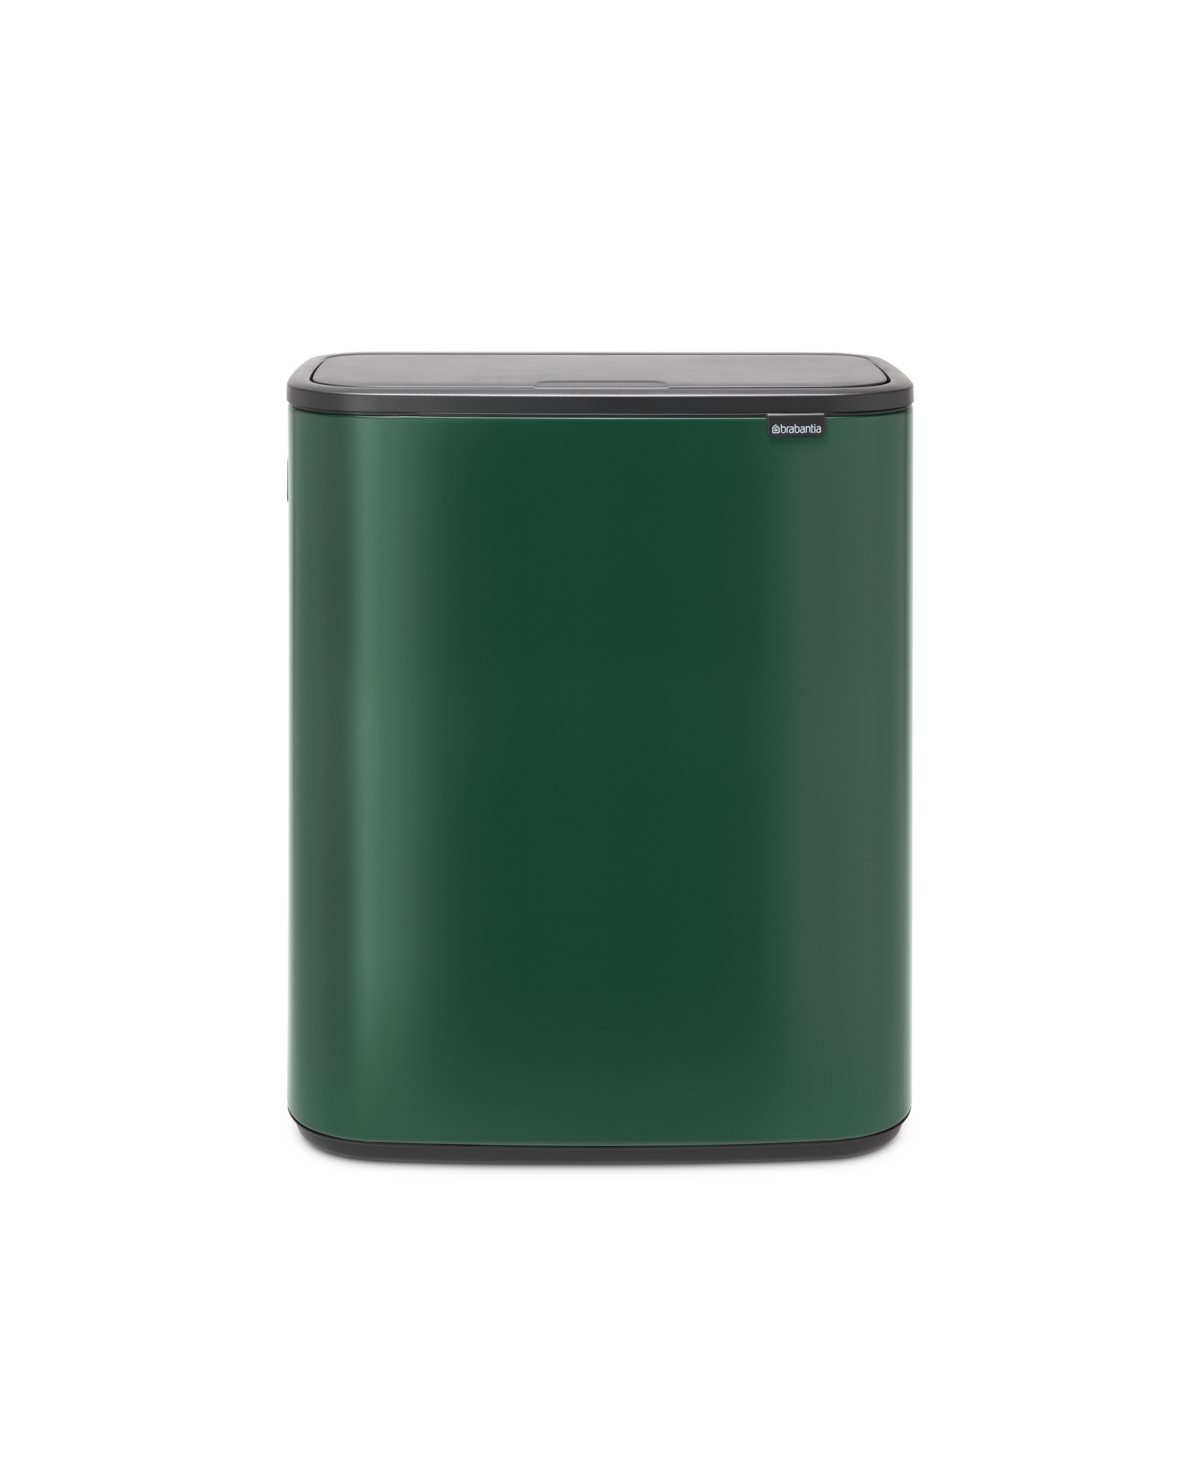 Bo Touch Top Trash Can, 16 Gallon, 60 Liter - Pine Green